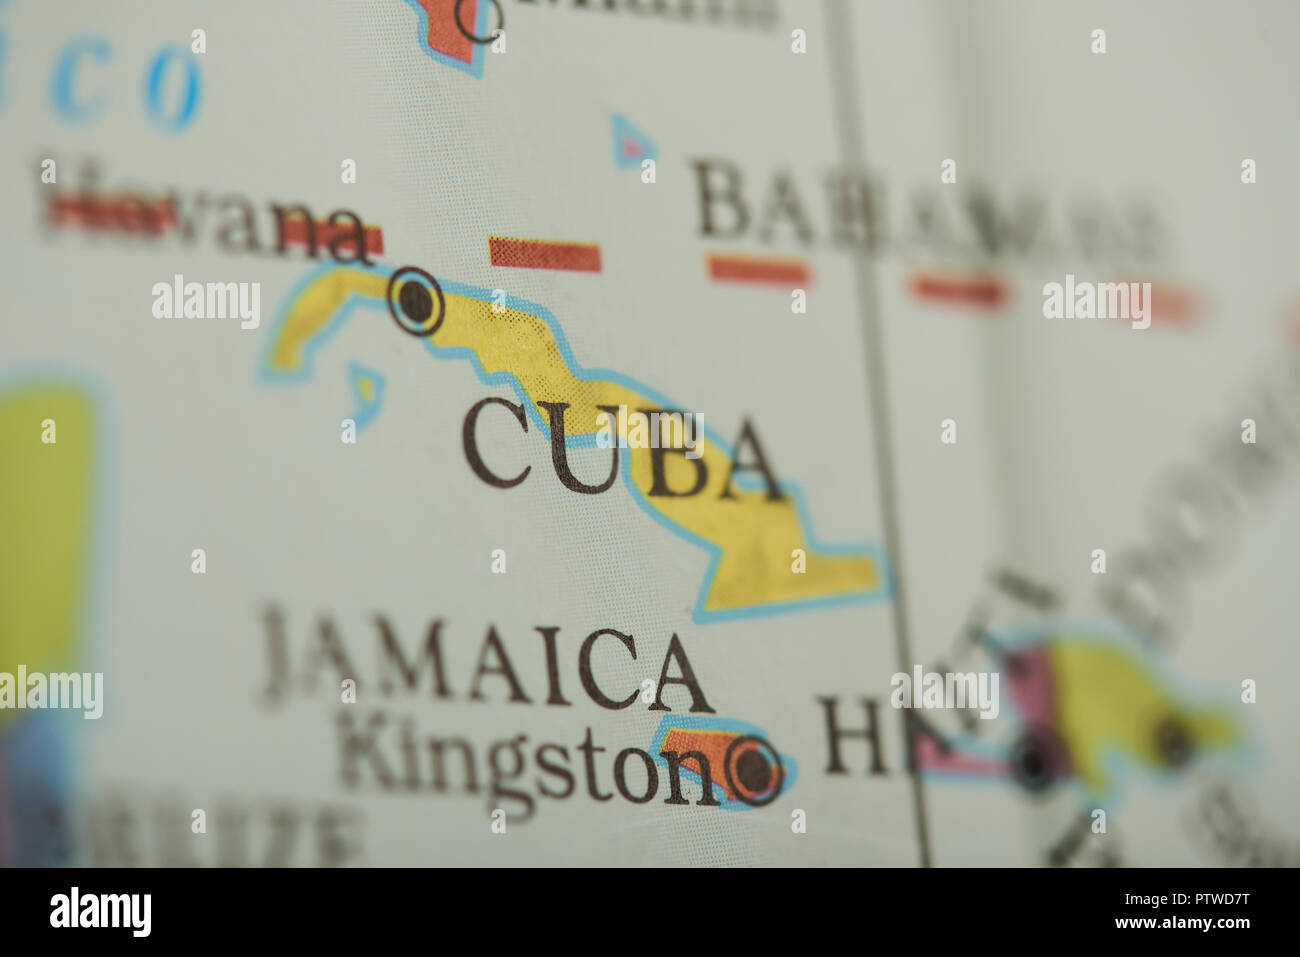 Cuba country on paper map close up view Stock Photo